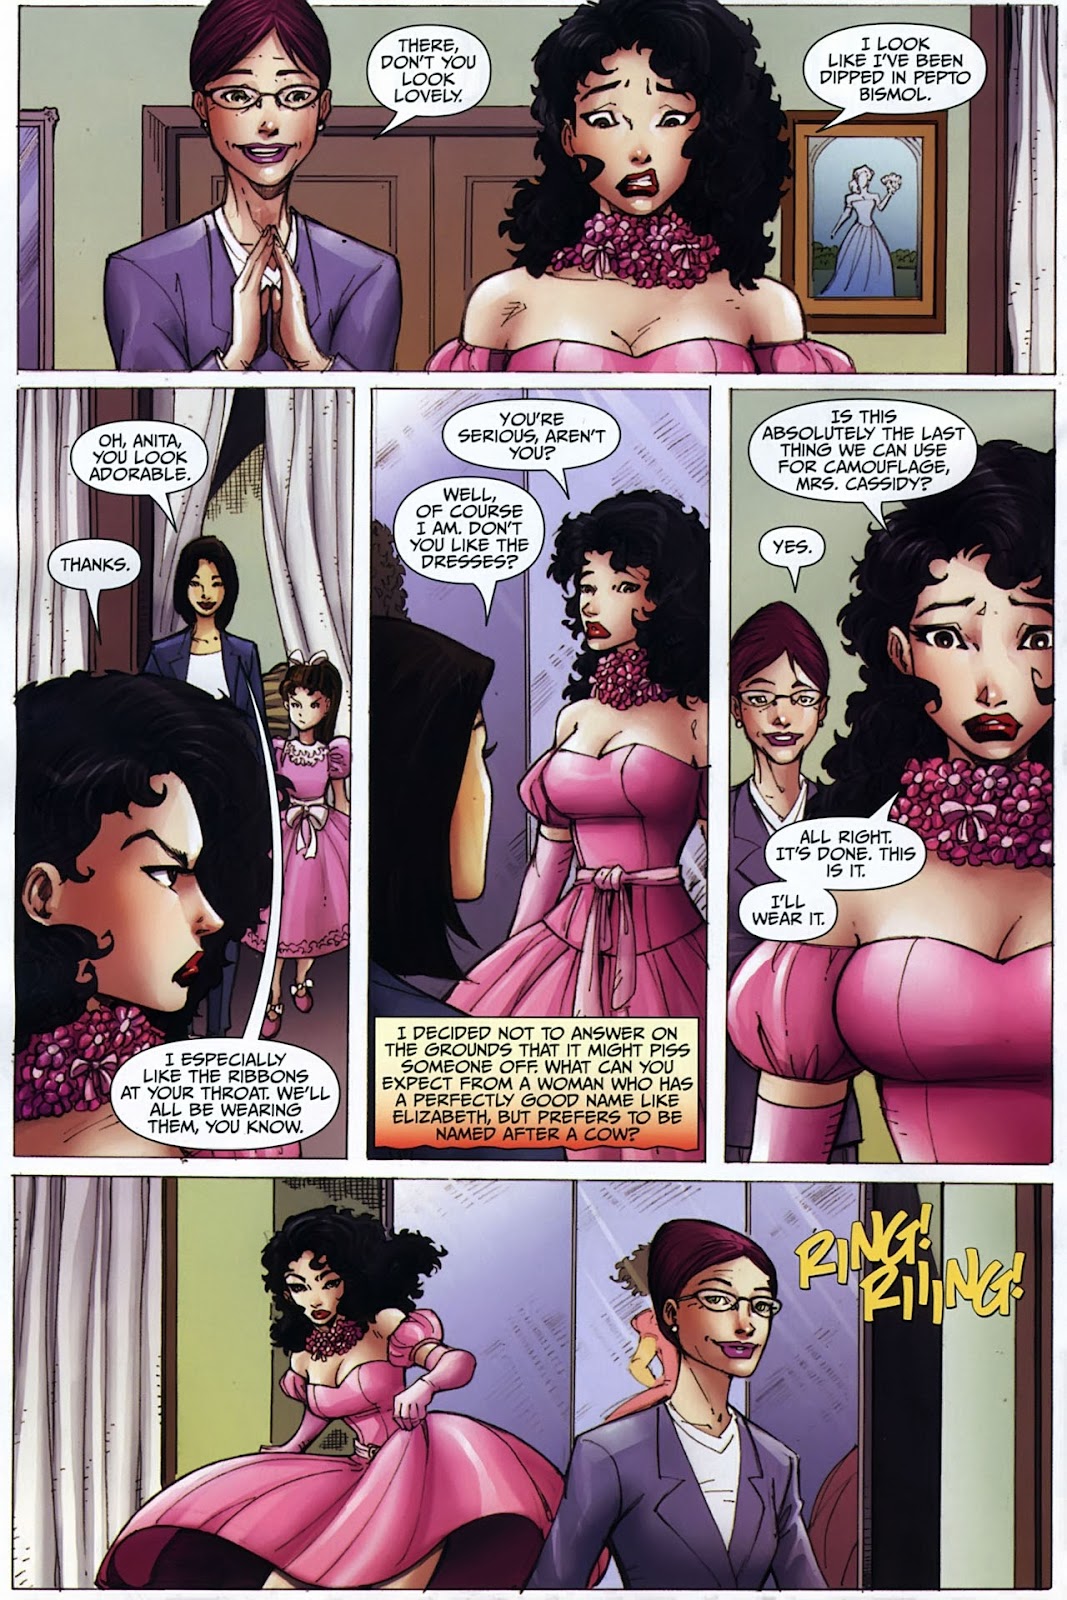 Anita Blake: The Laughing Corpse - Book One issue 1 - Page 15